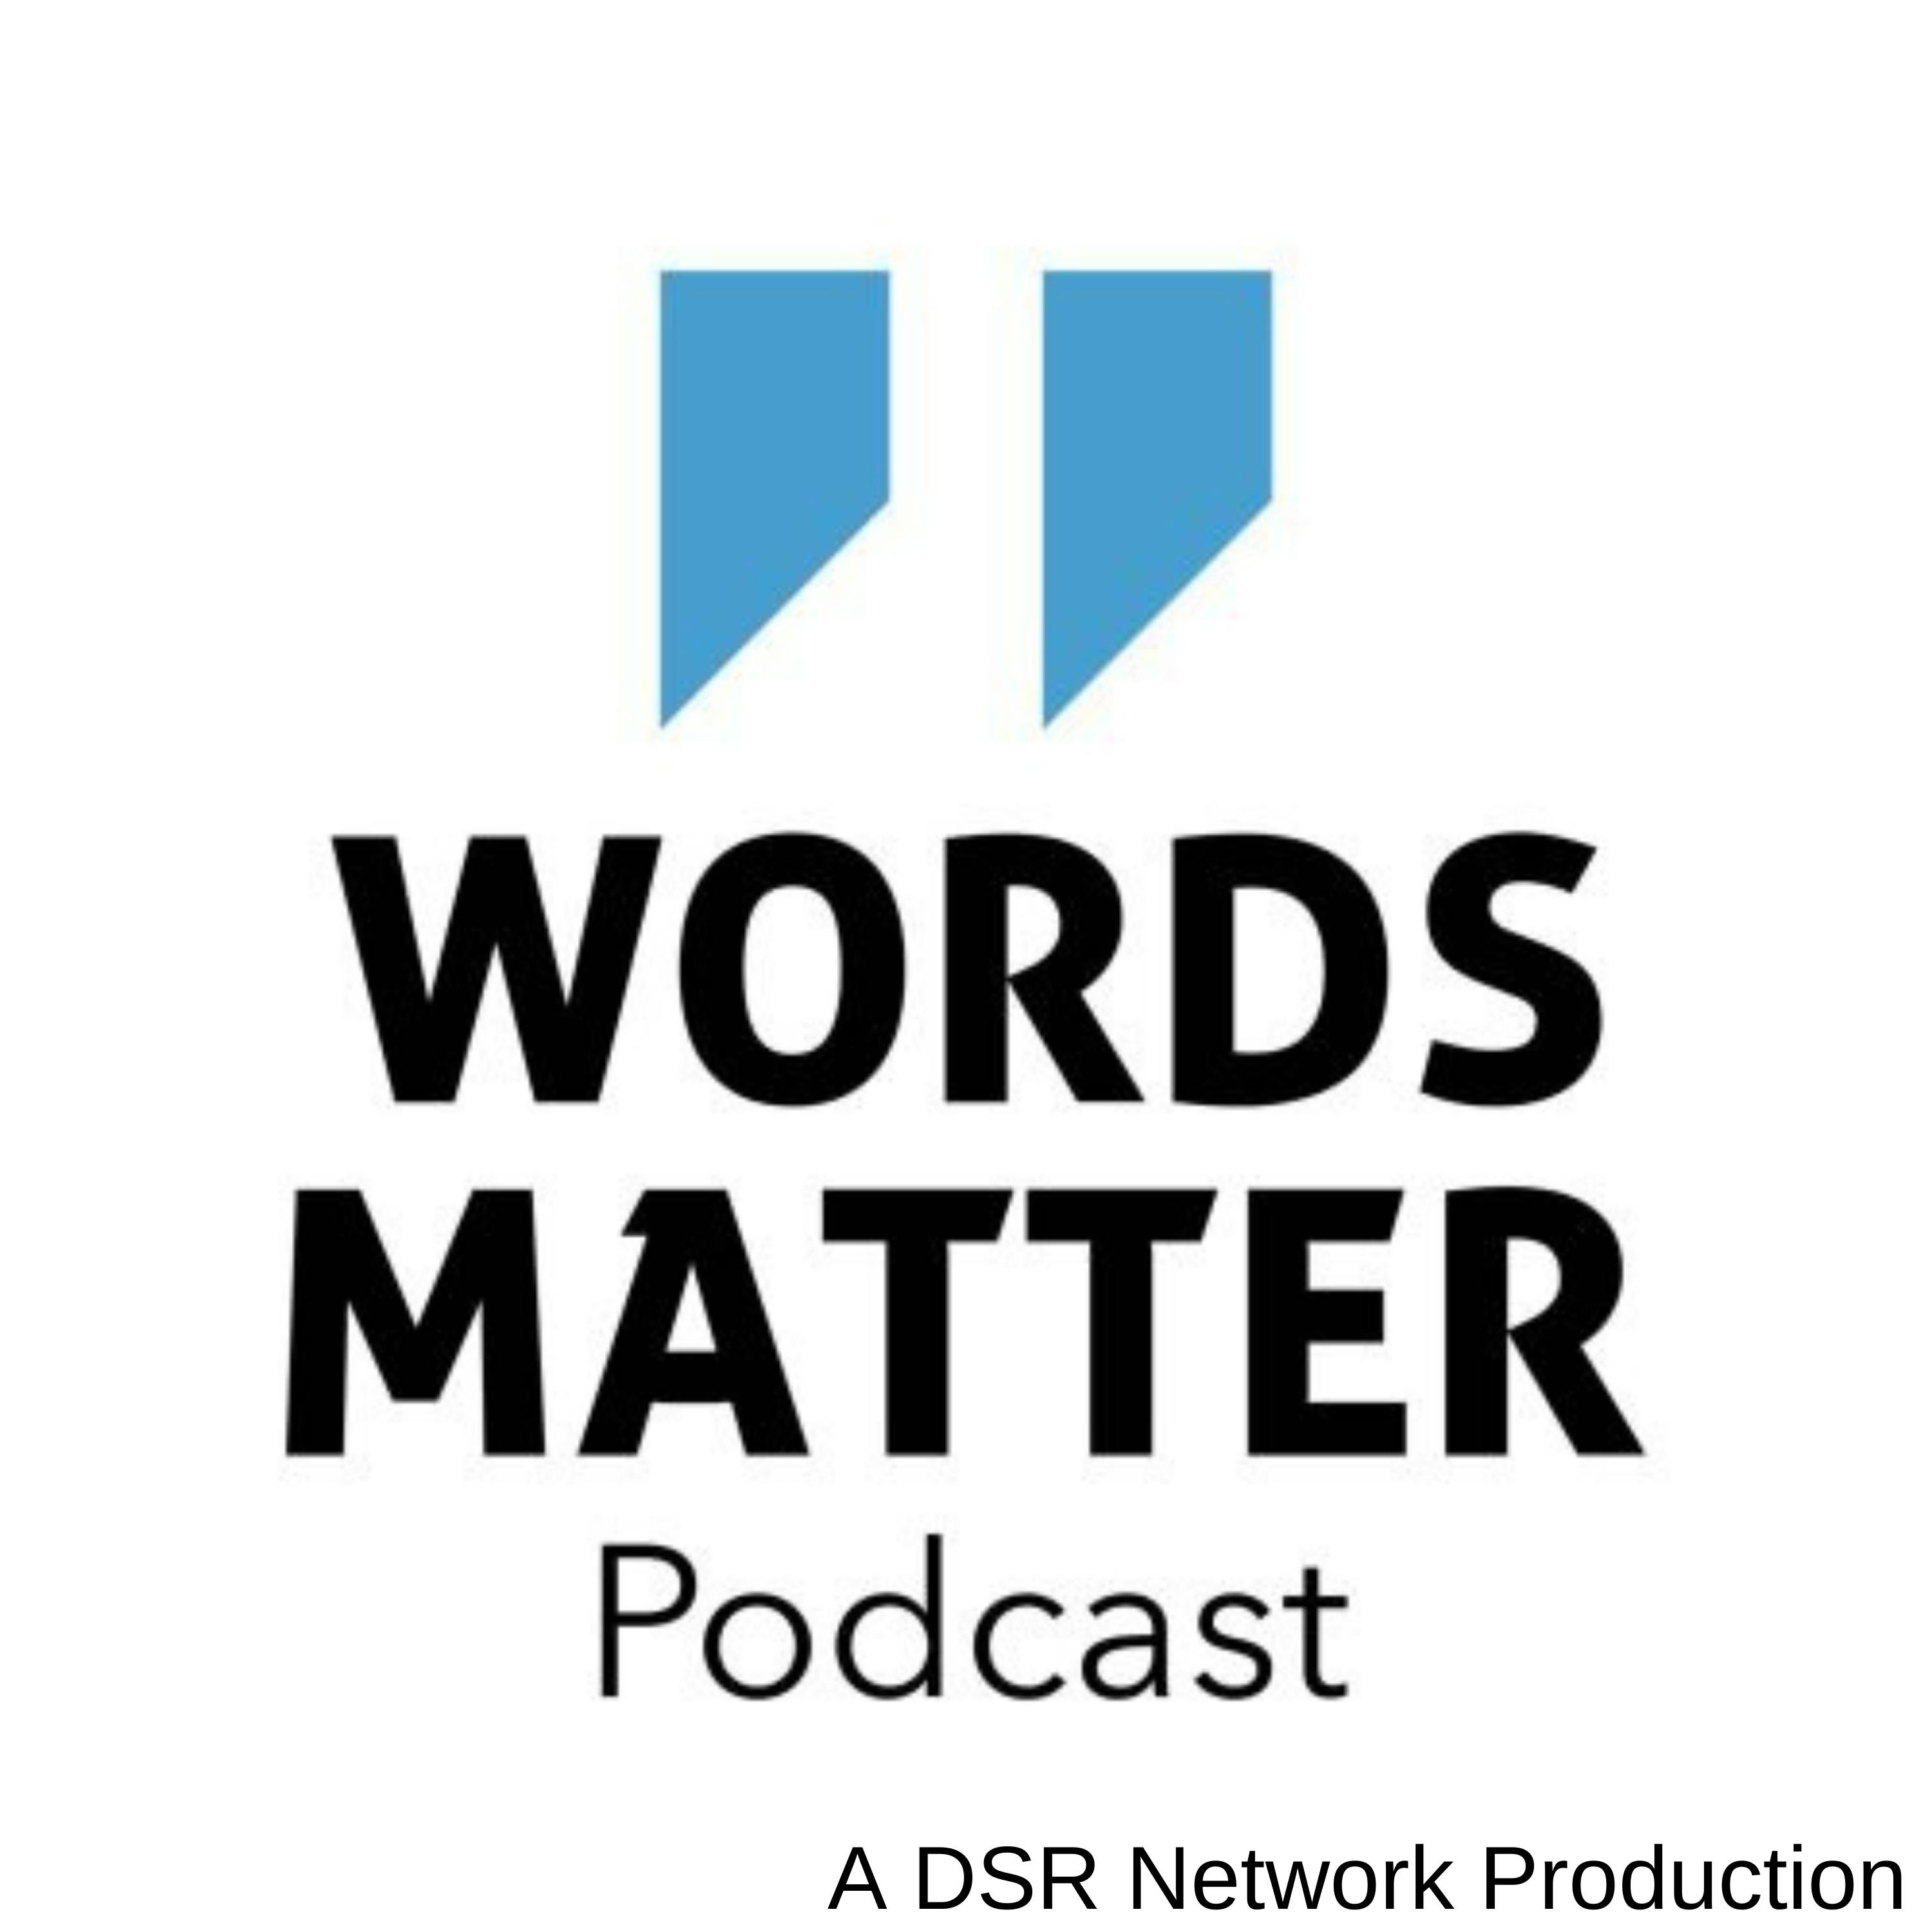 Words Matter: Dealing with the Backlash - the Democratic Party and Biden’s Future